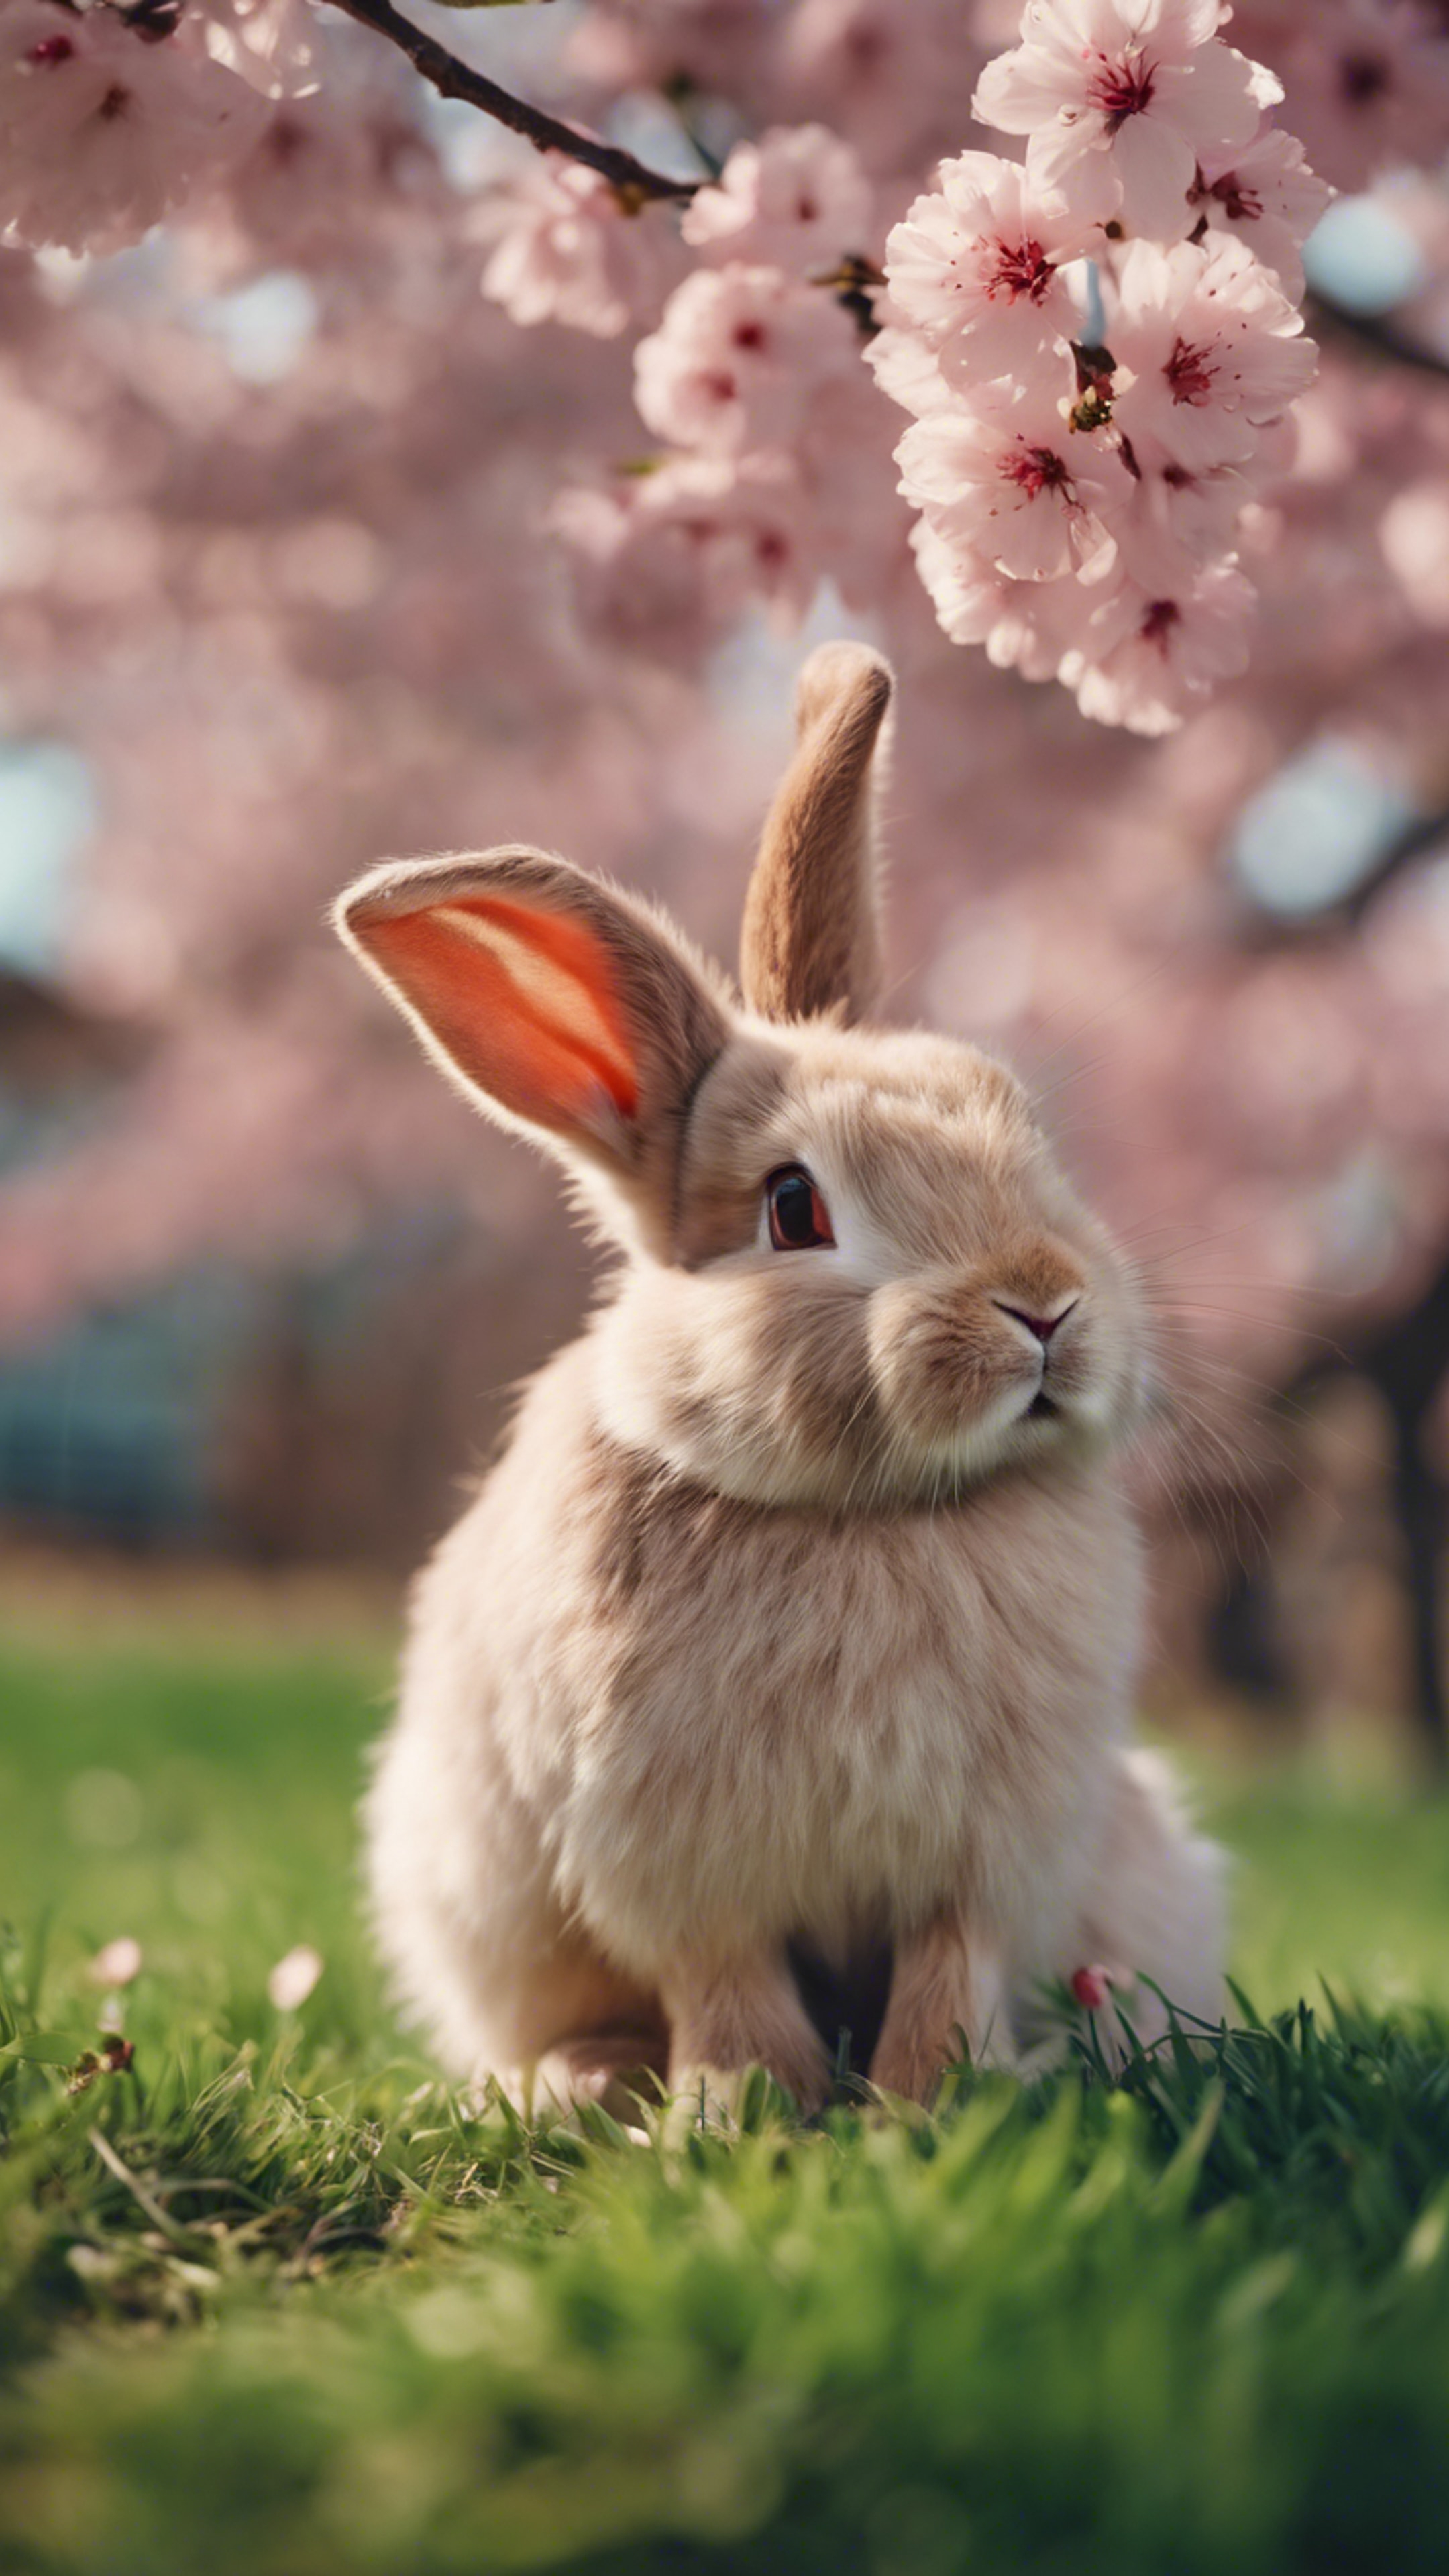 An adorable beige bunny wearing a red bow on its head, seated in a green field under a pink cherry blossom tree. Дэлгэцийн зураг[158bdbe2fb0e44ca96b2]